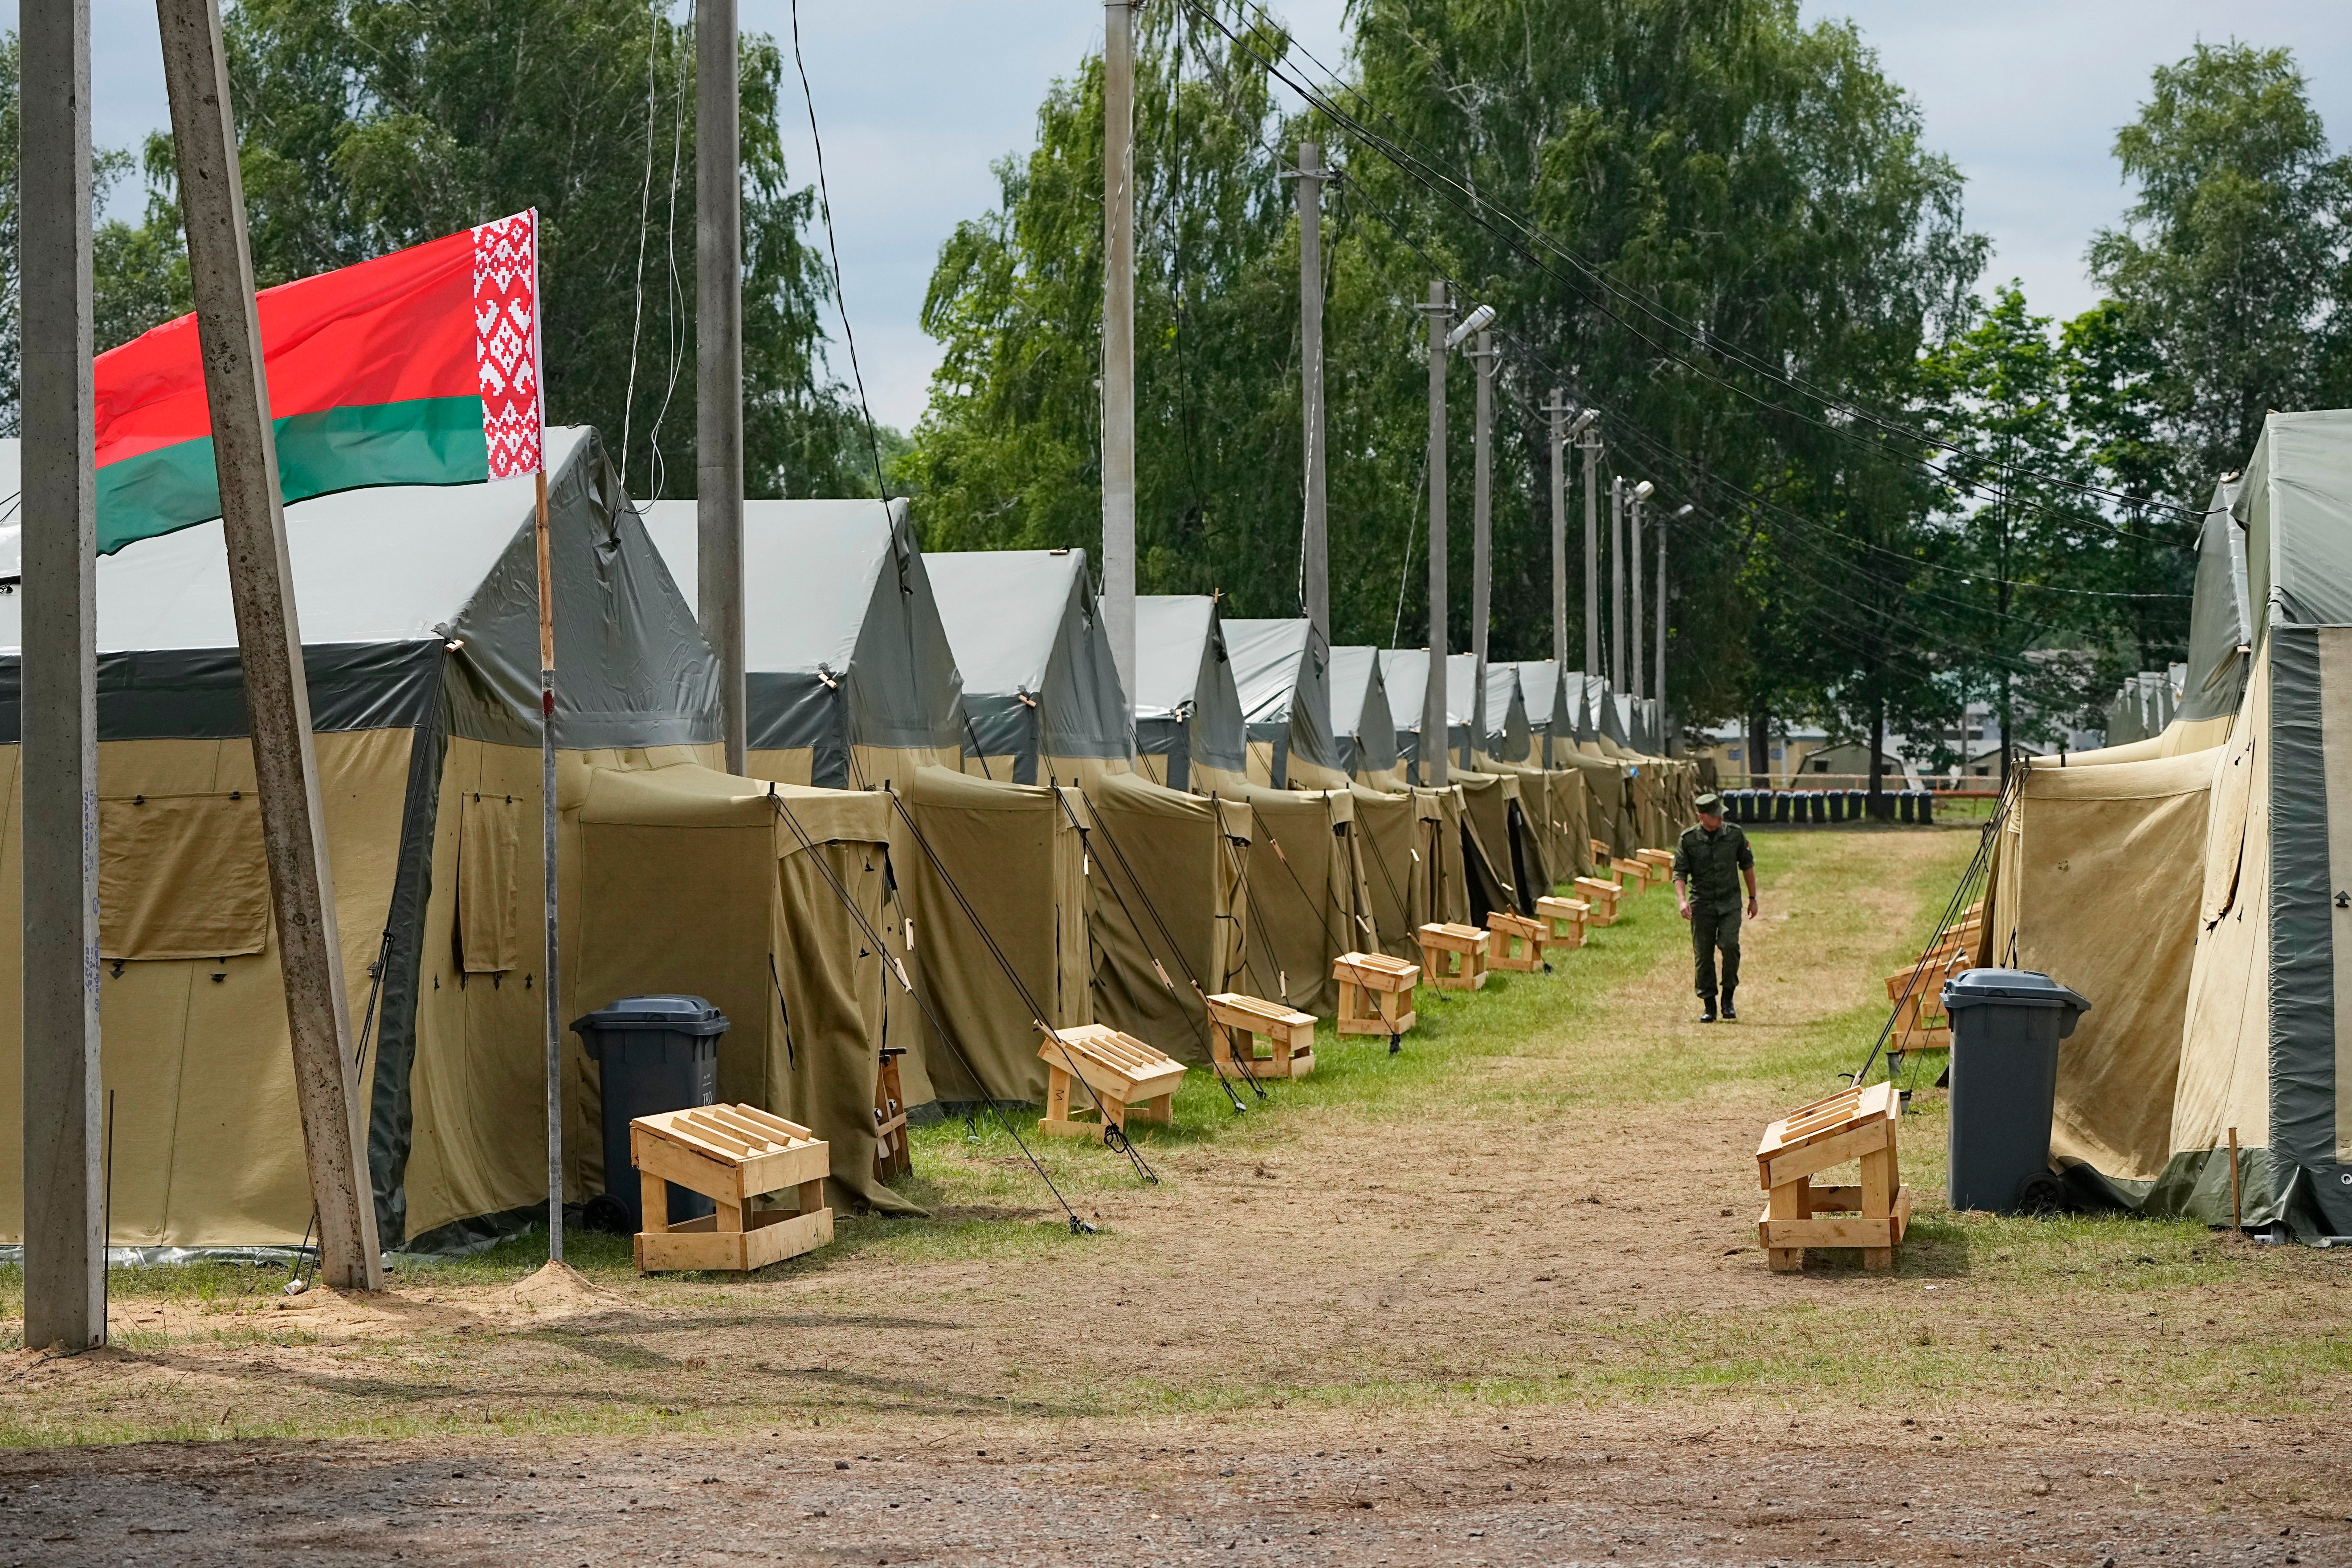 A view of the Belarusian army camp near Tsel village, about about 55 miles southeast of Minsk, Belarus